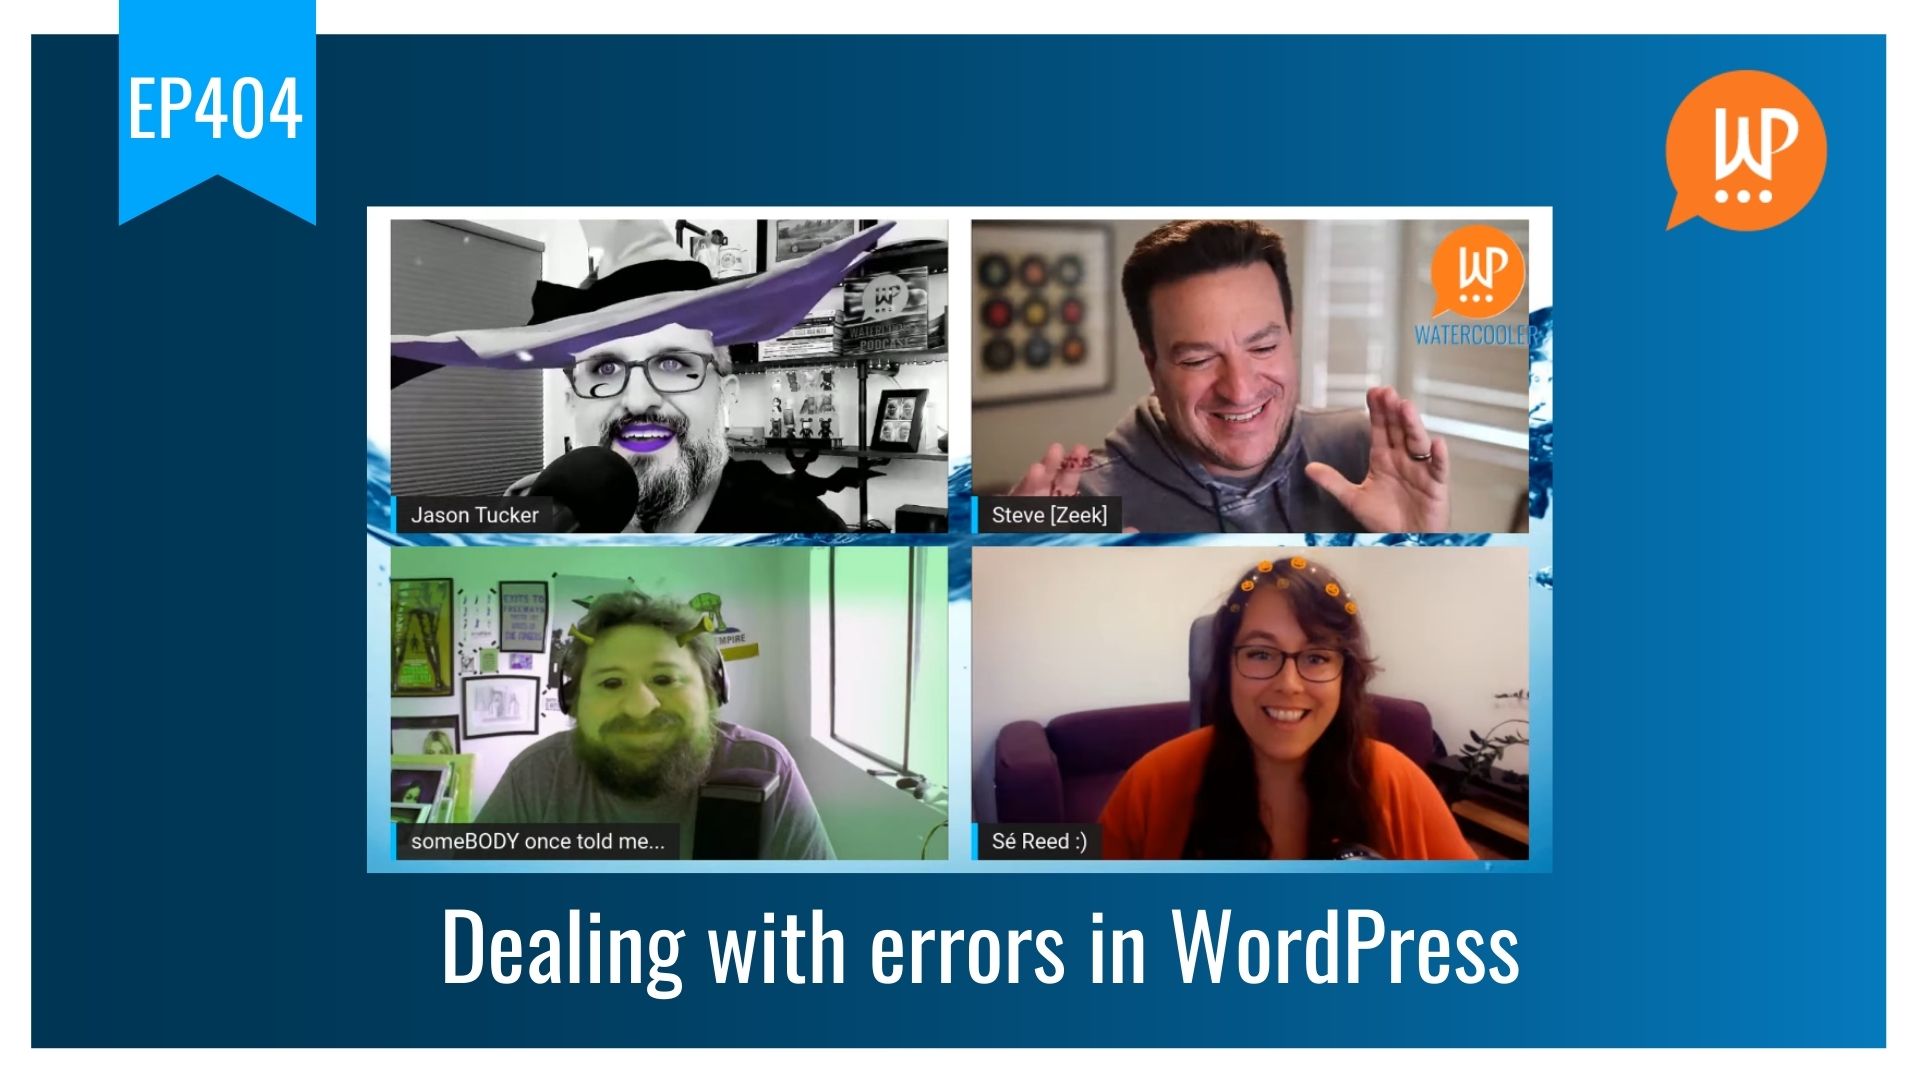 EP404 – Dealing with errors in WordPress